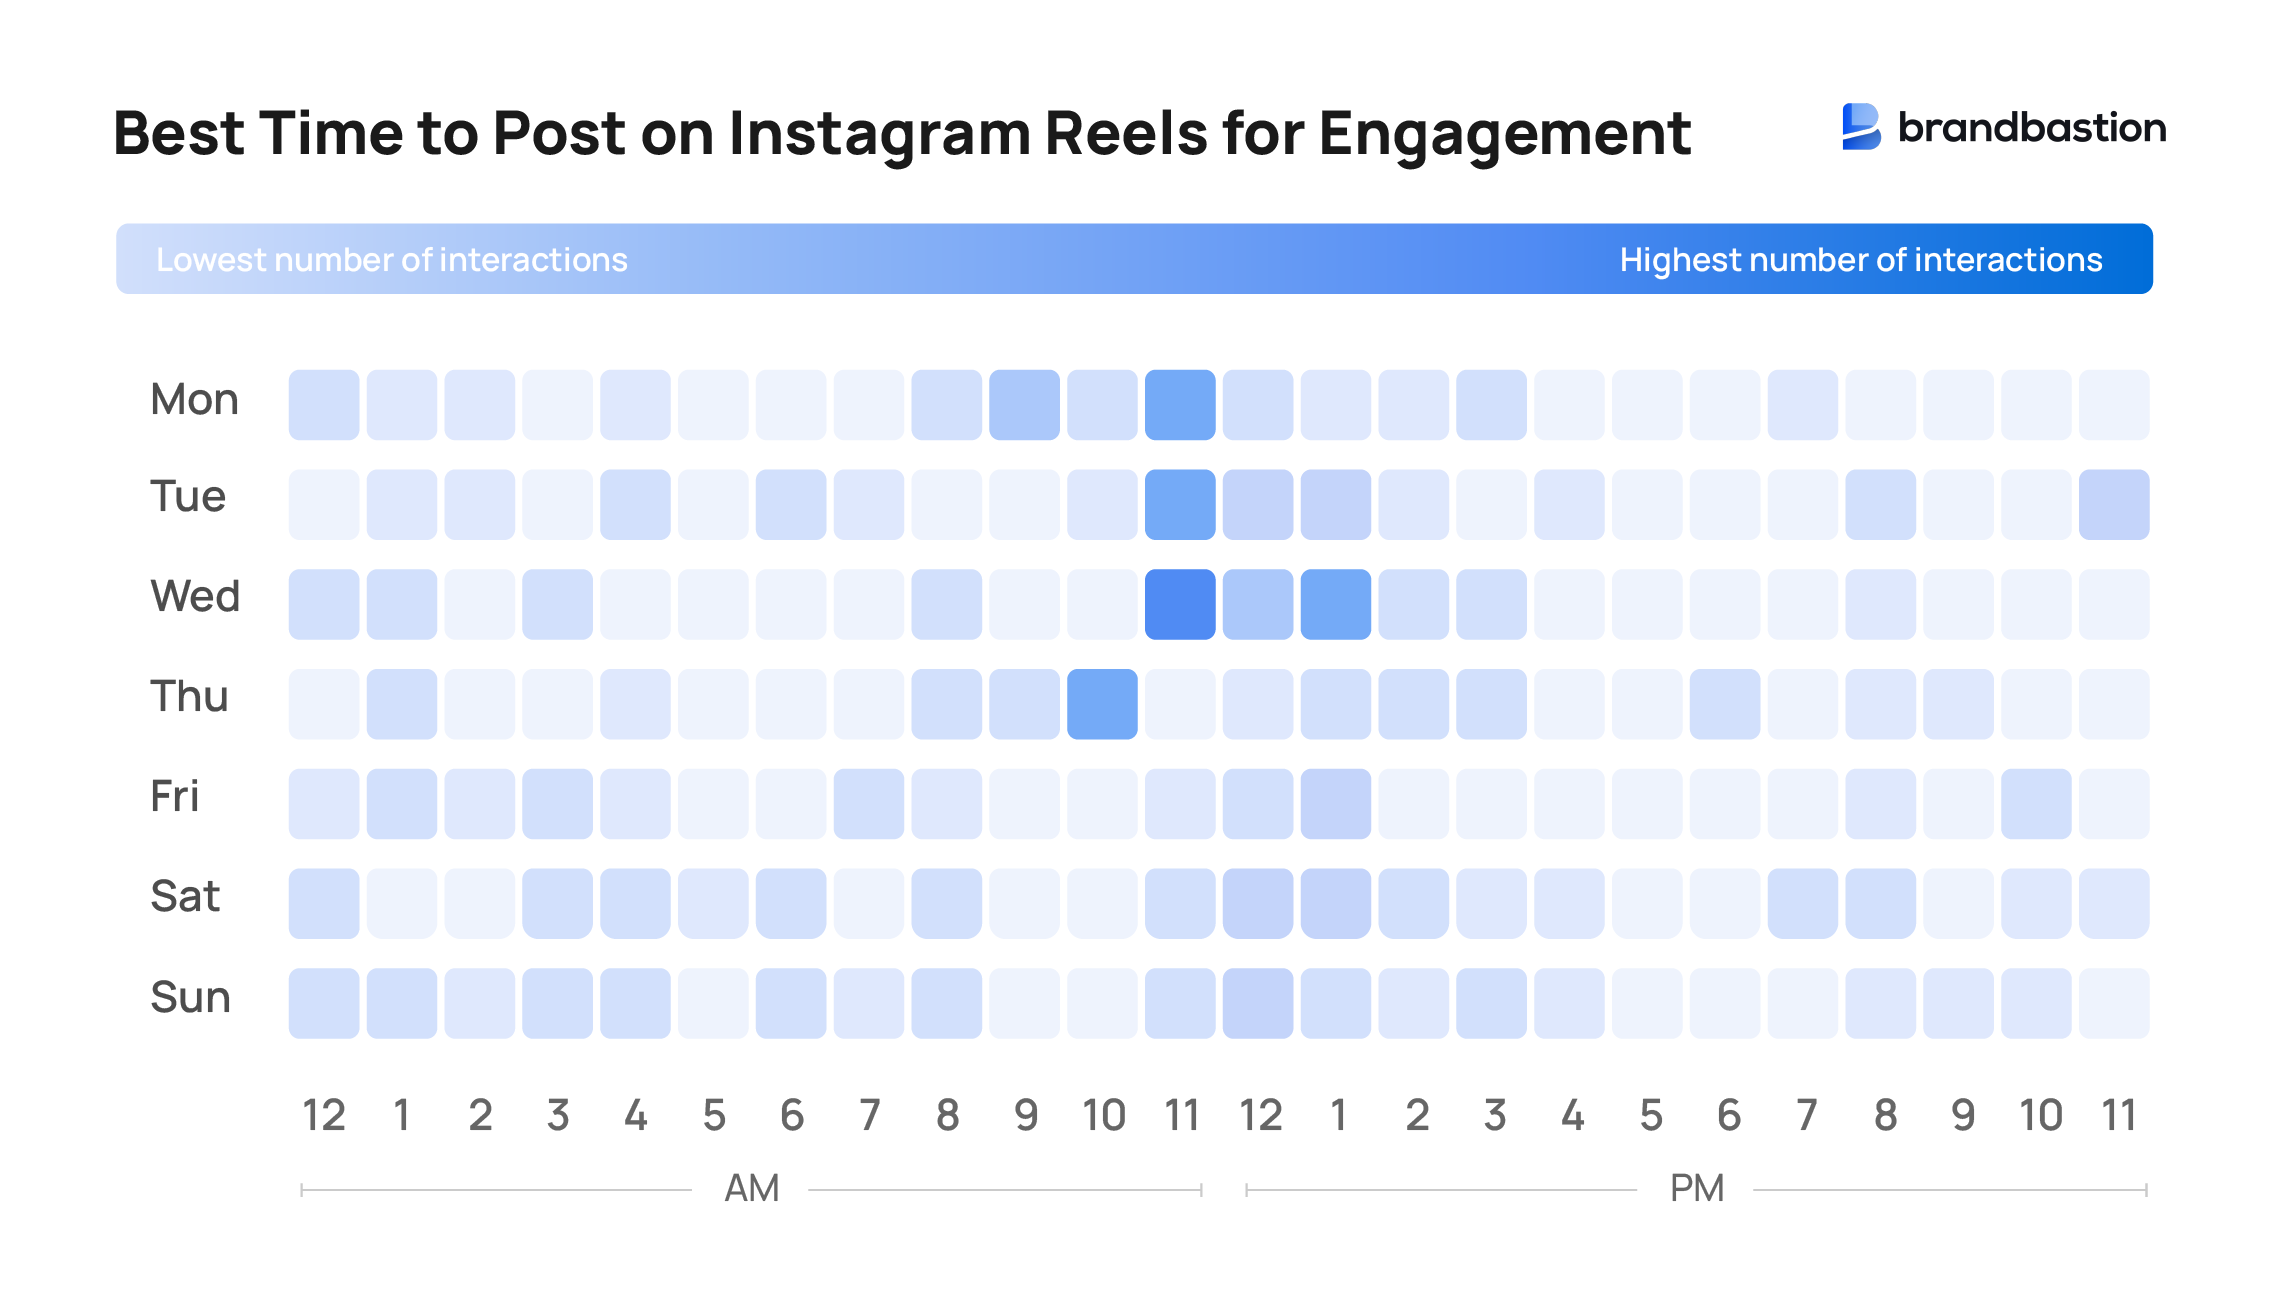 Best times to post on Instagram reels for engagement